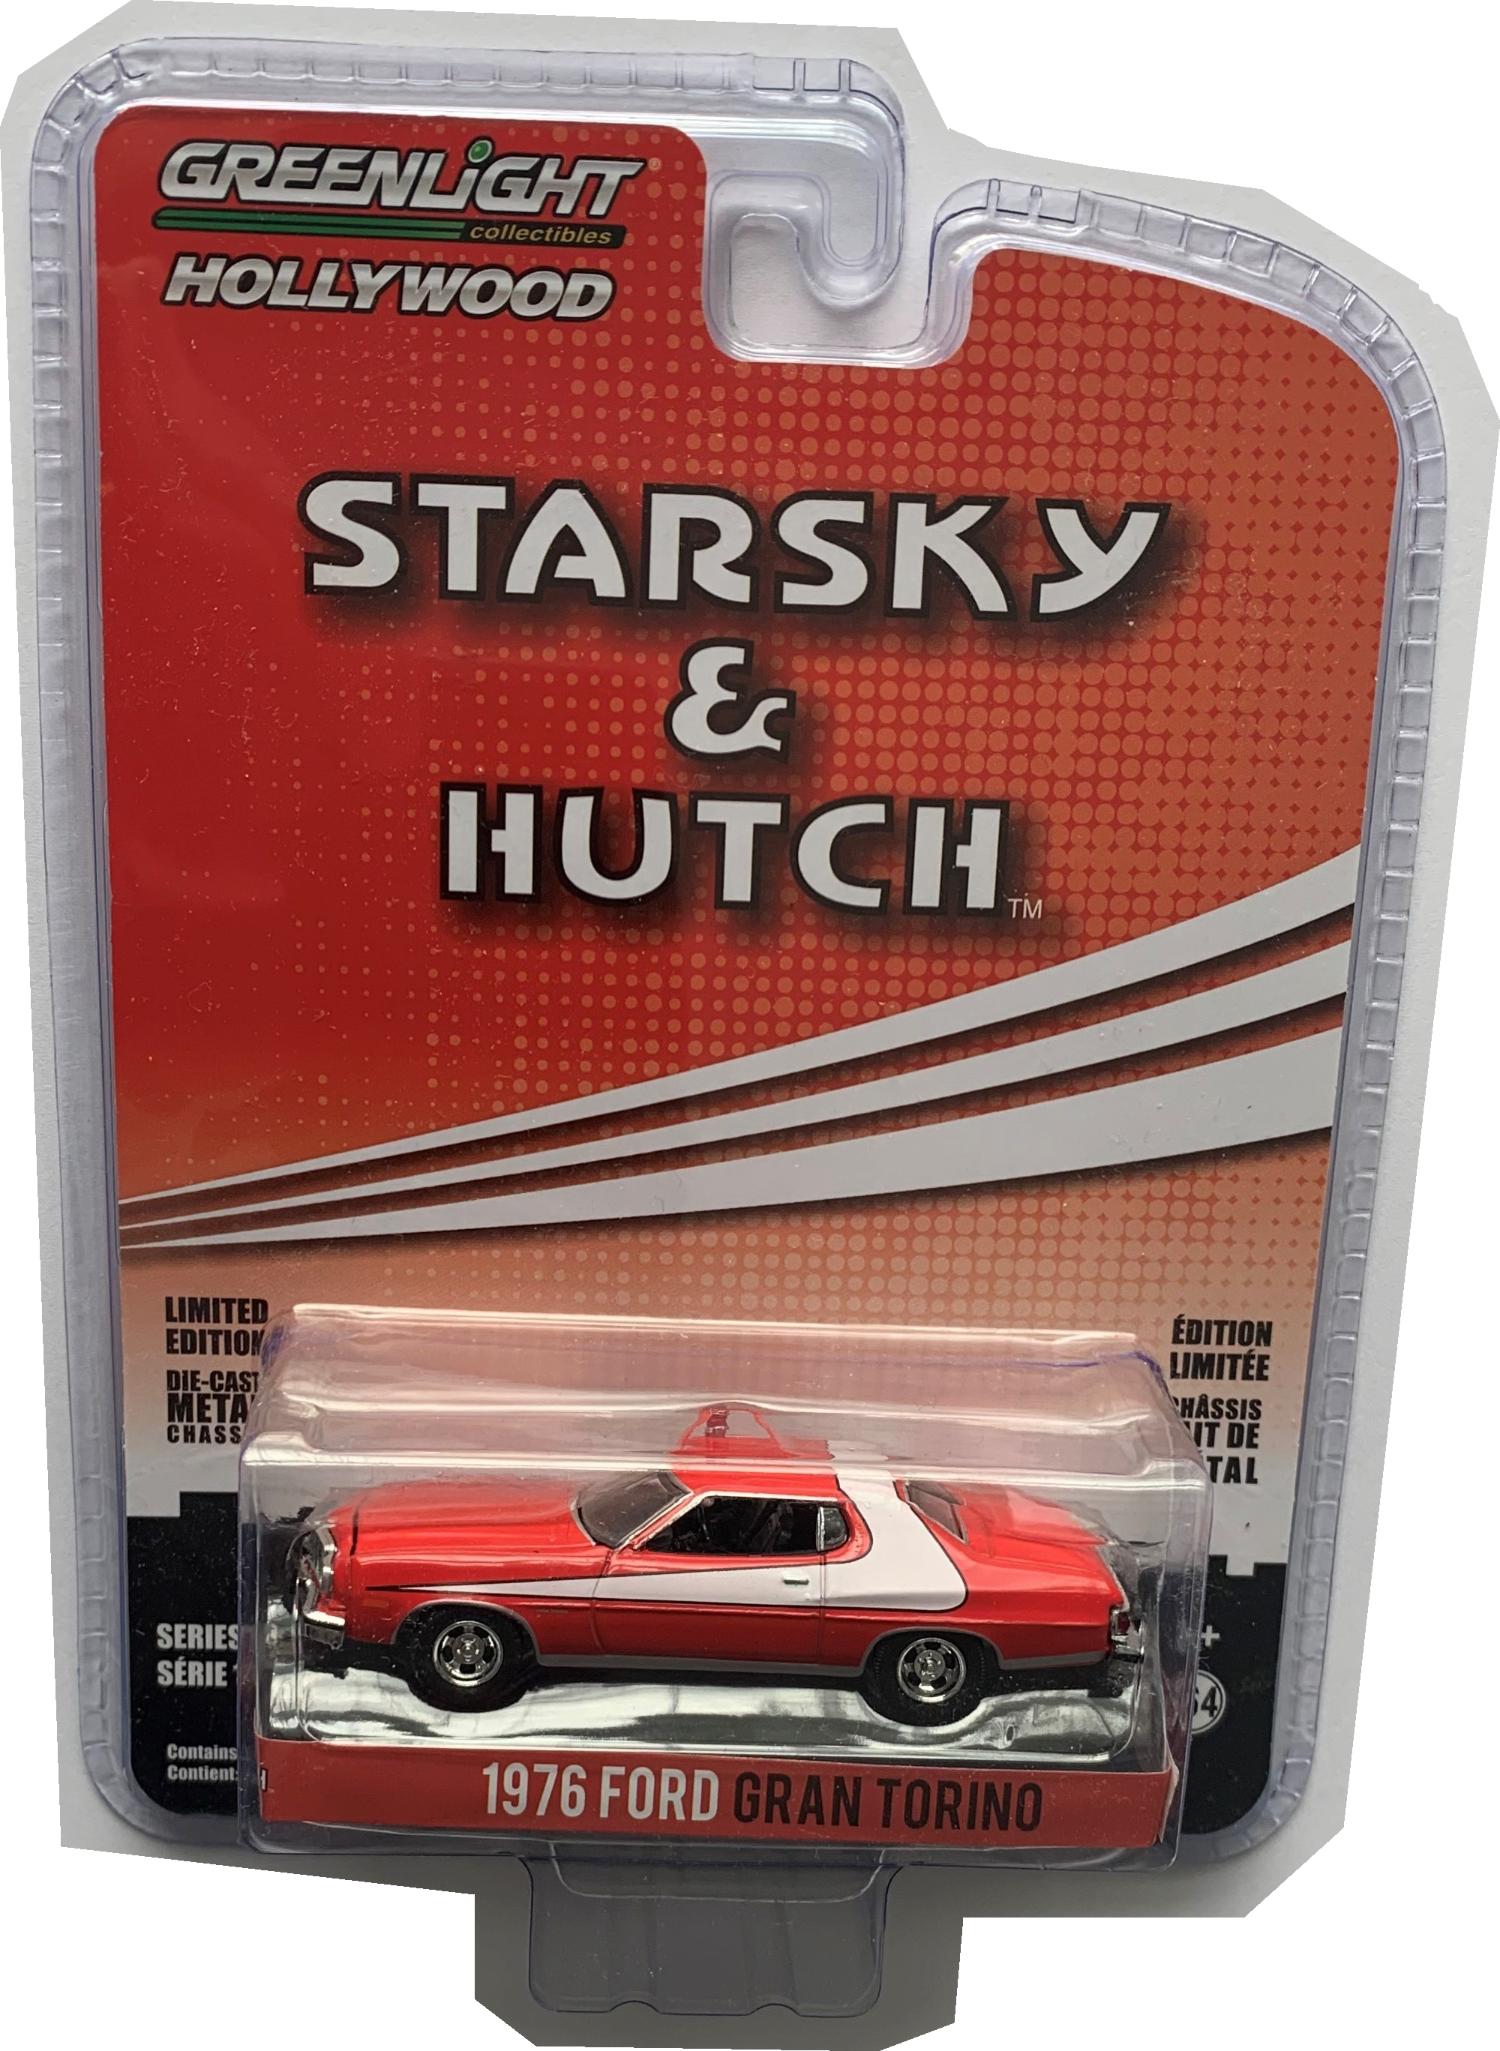 Starsky & Hutch 1976 Ford Gran Torino 1:64 scale model from Greenlight Hollywood, series 18, Limited Edition model